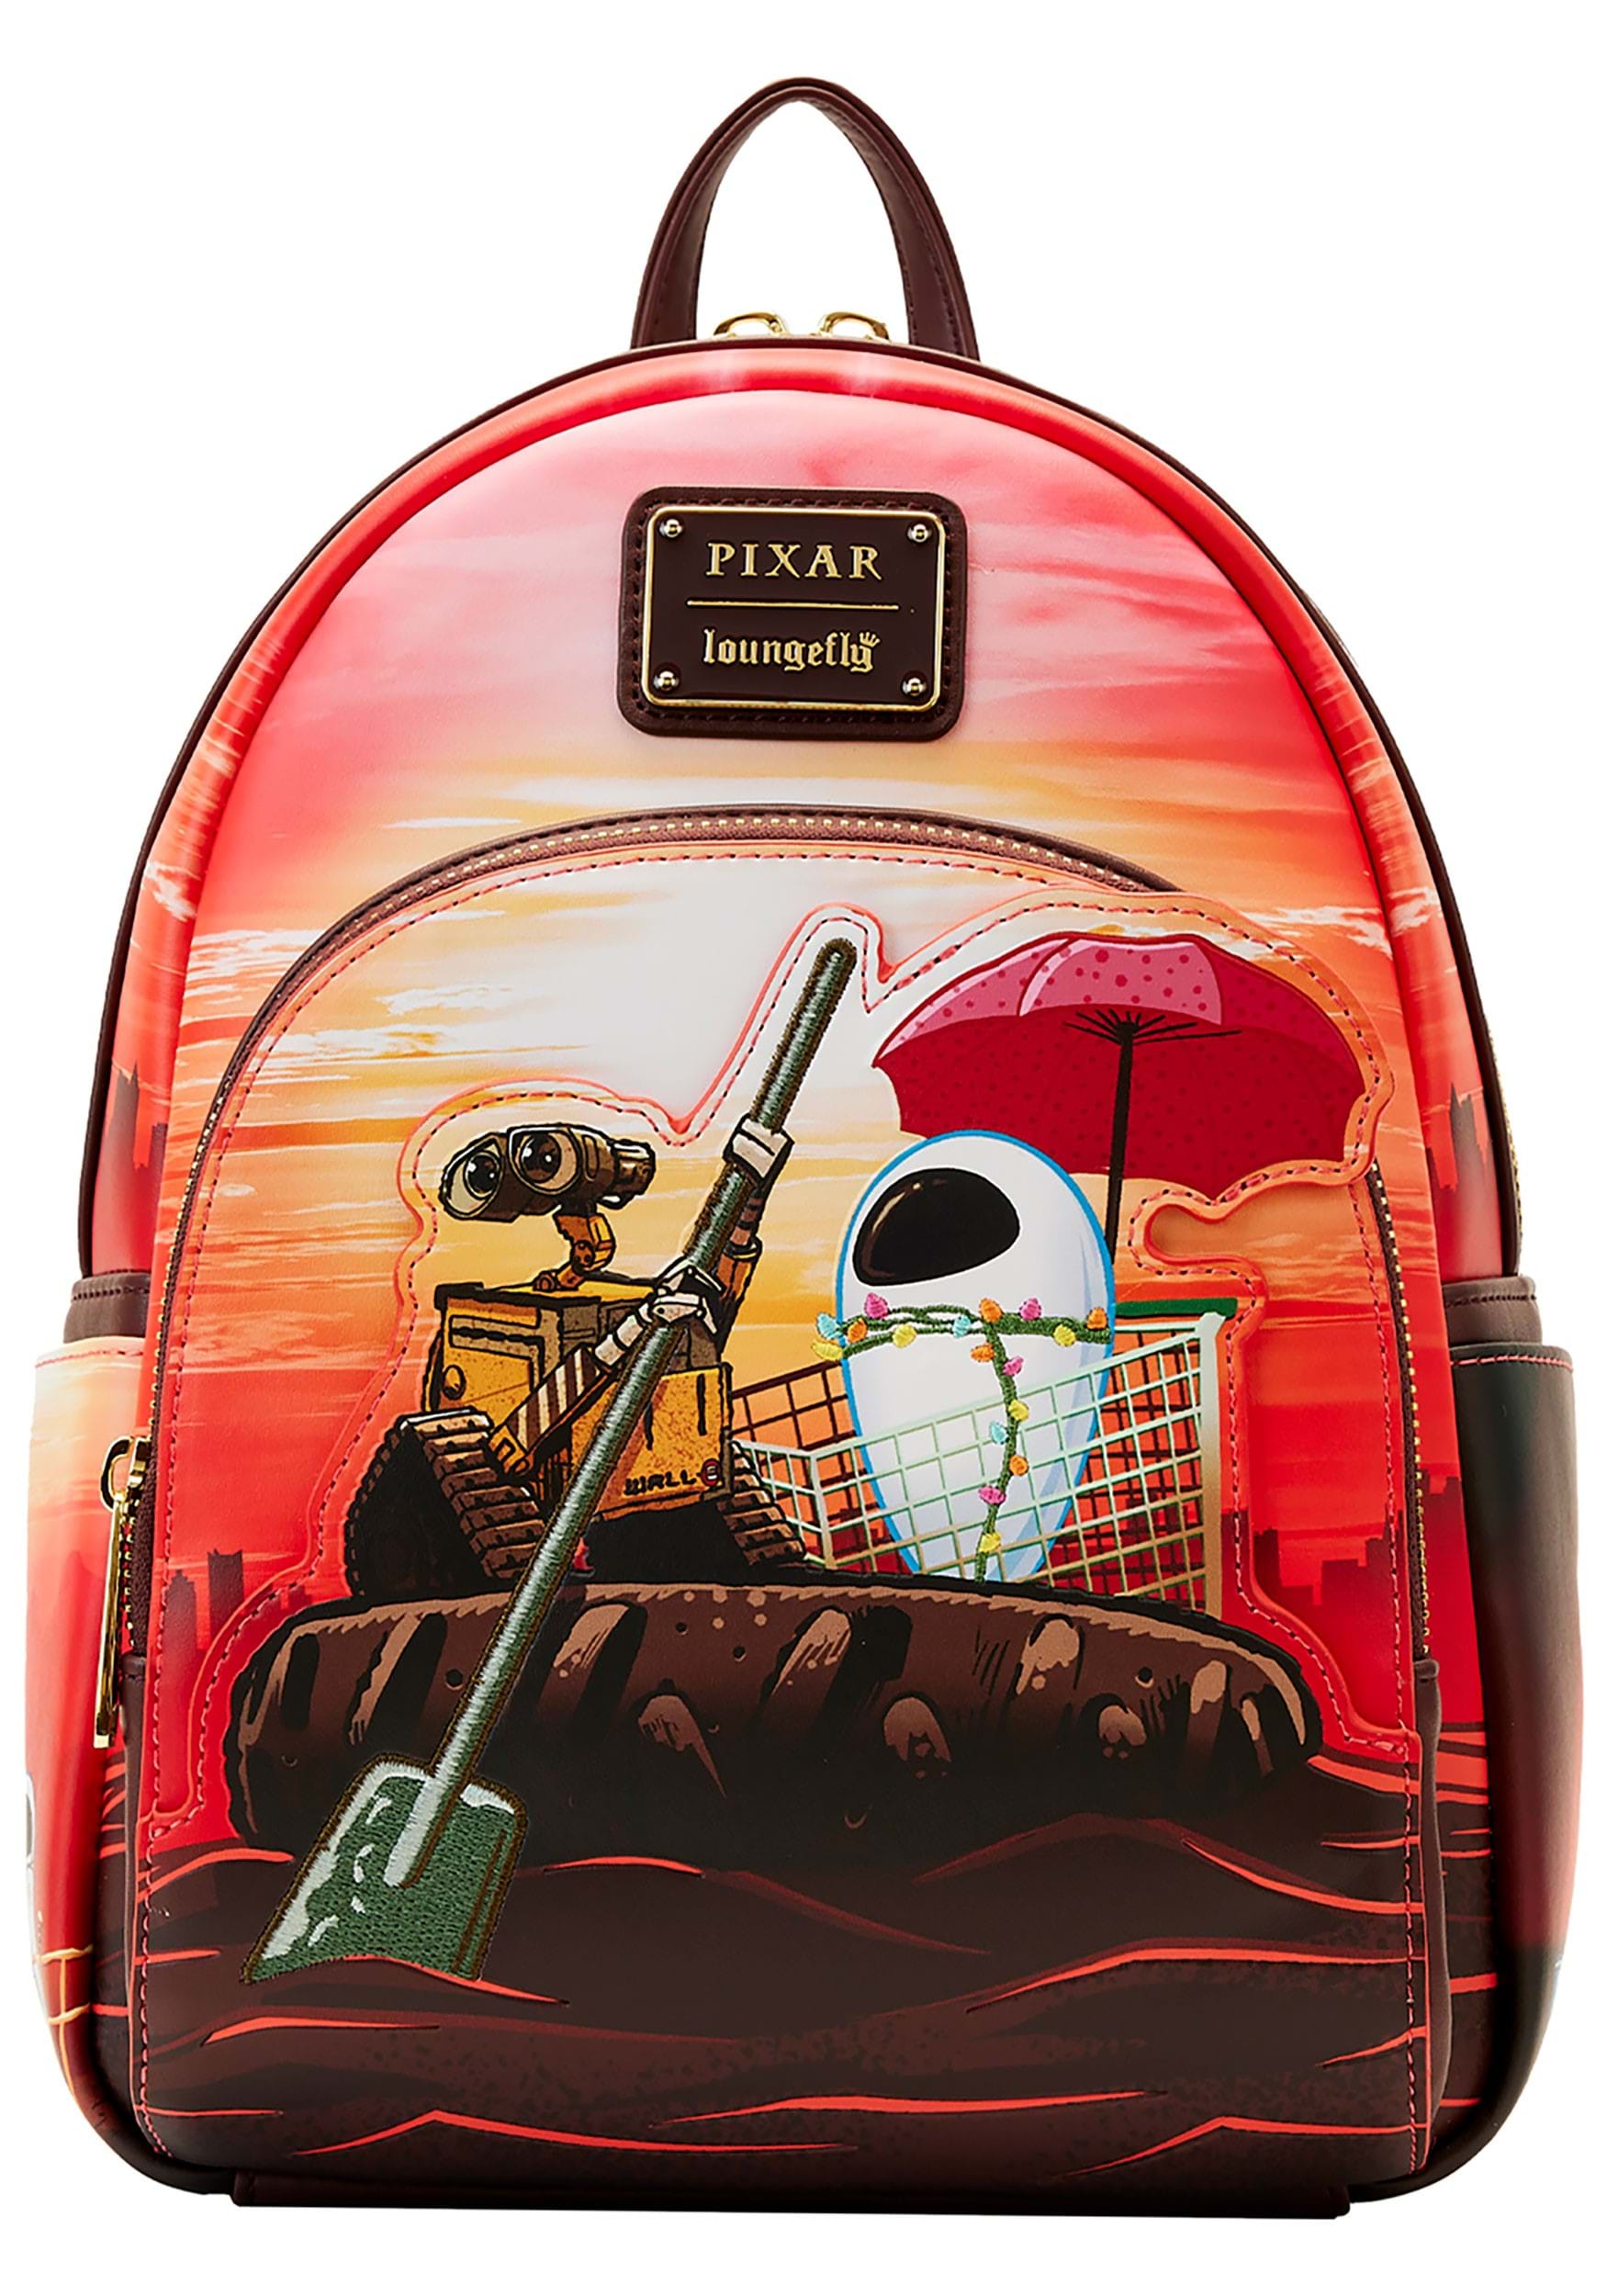 Pixar Moments Wall-E Date Night Mini Backpack by Loungefly